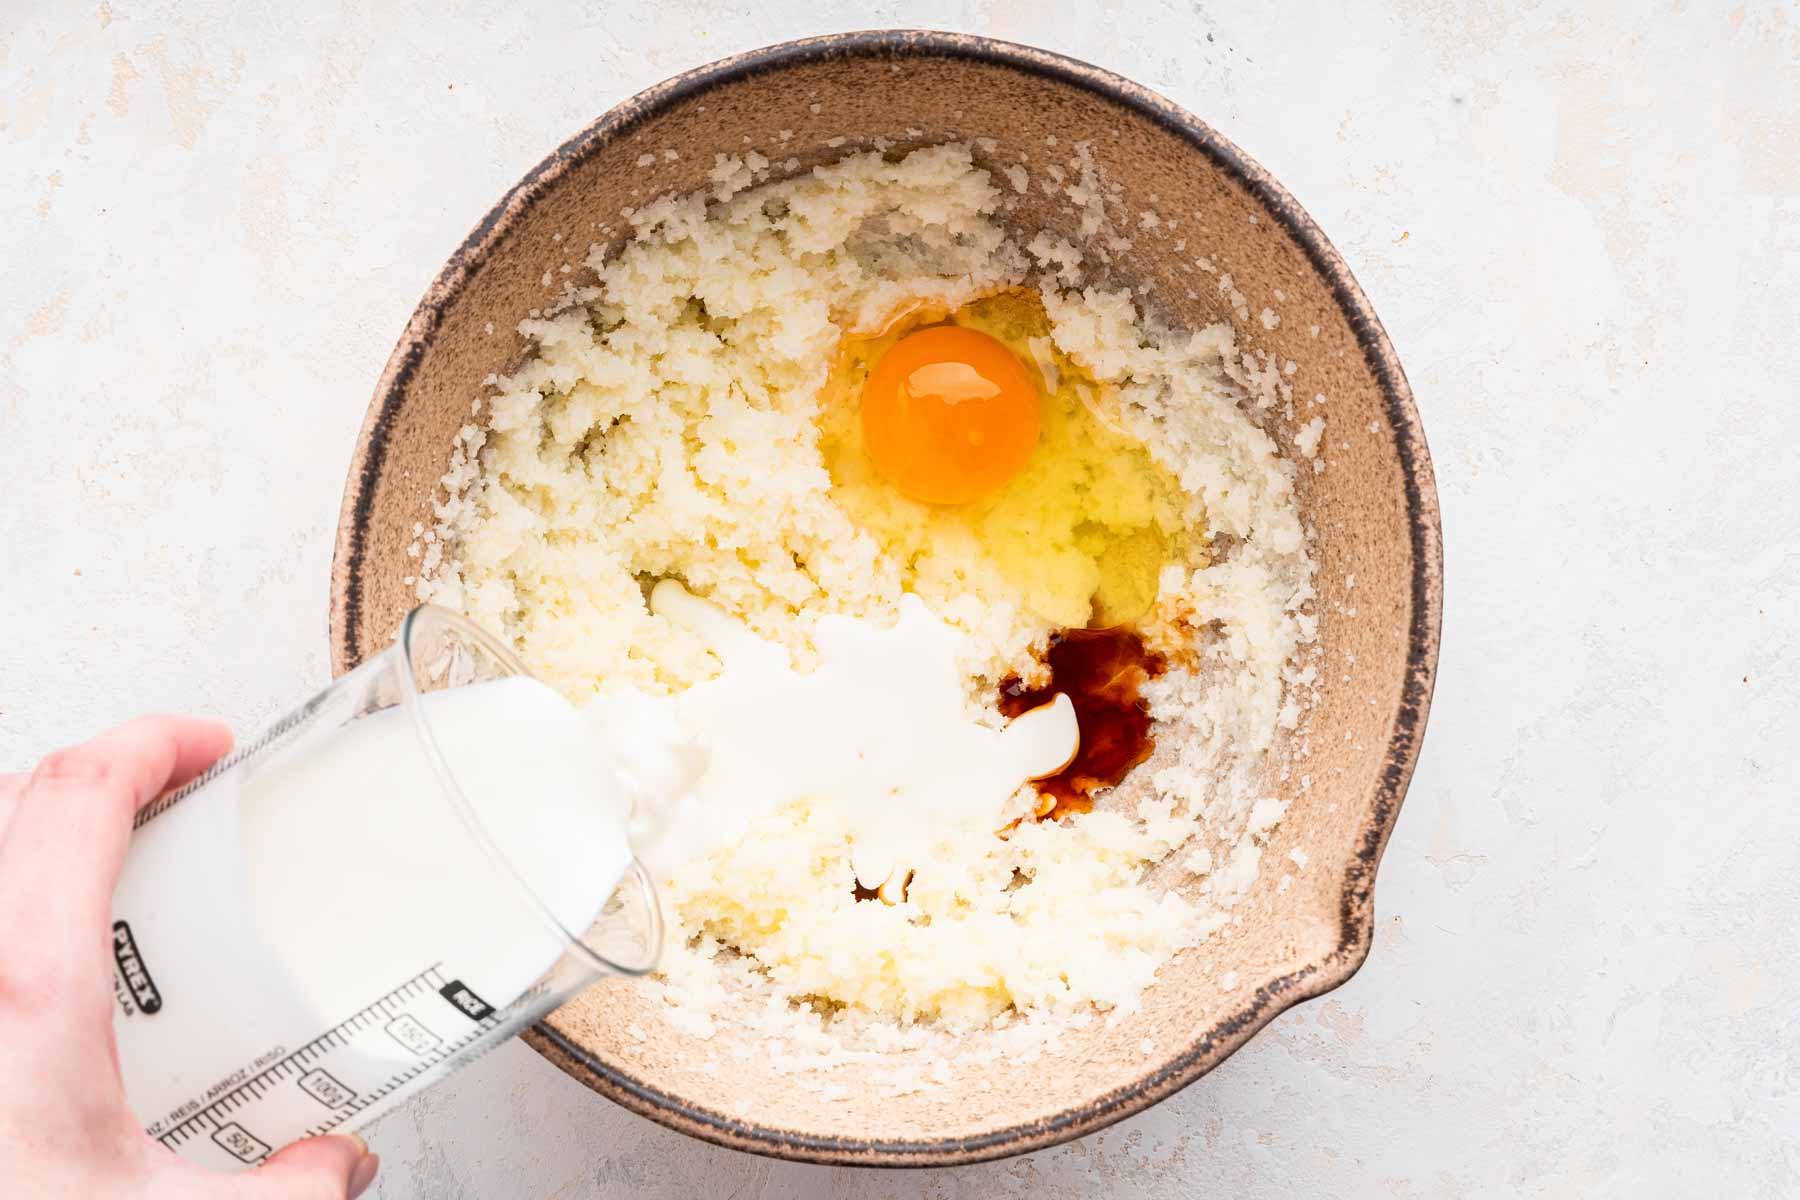 Yellow batter with egg and vanilla, and a hand pouring cream into the bowl.